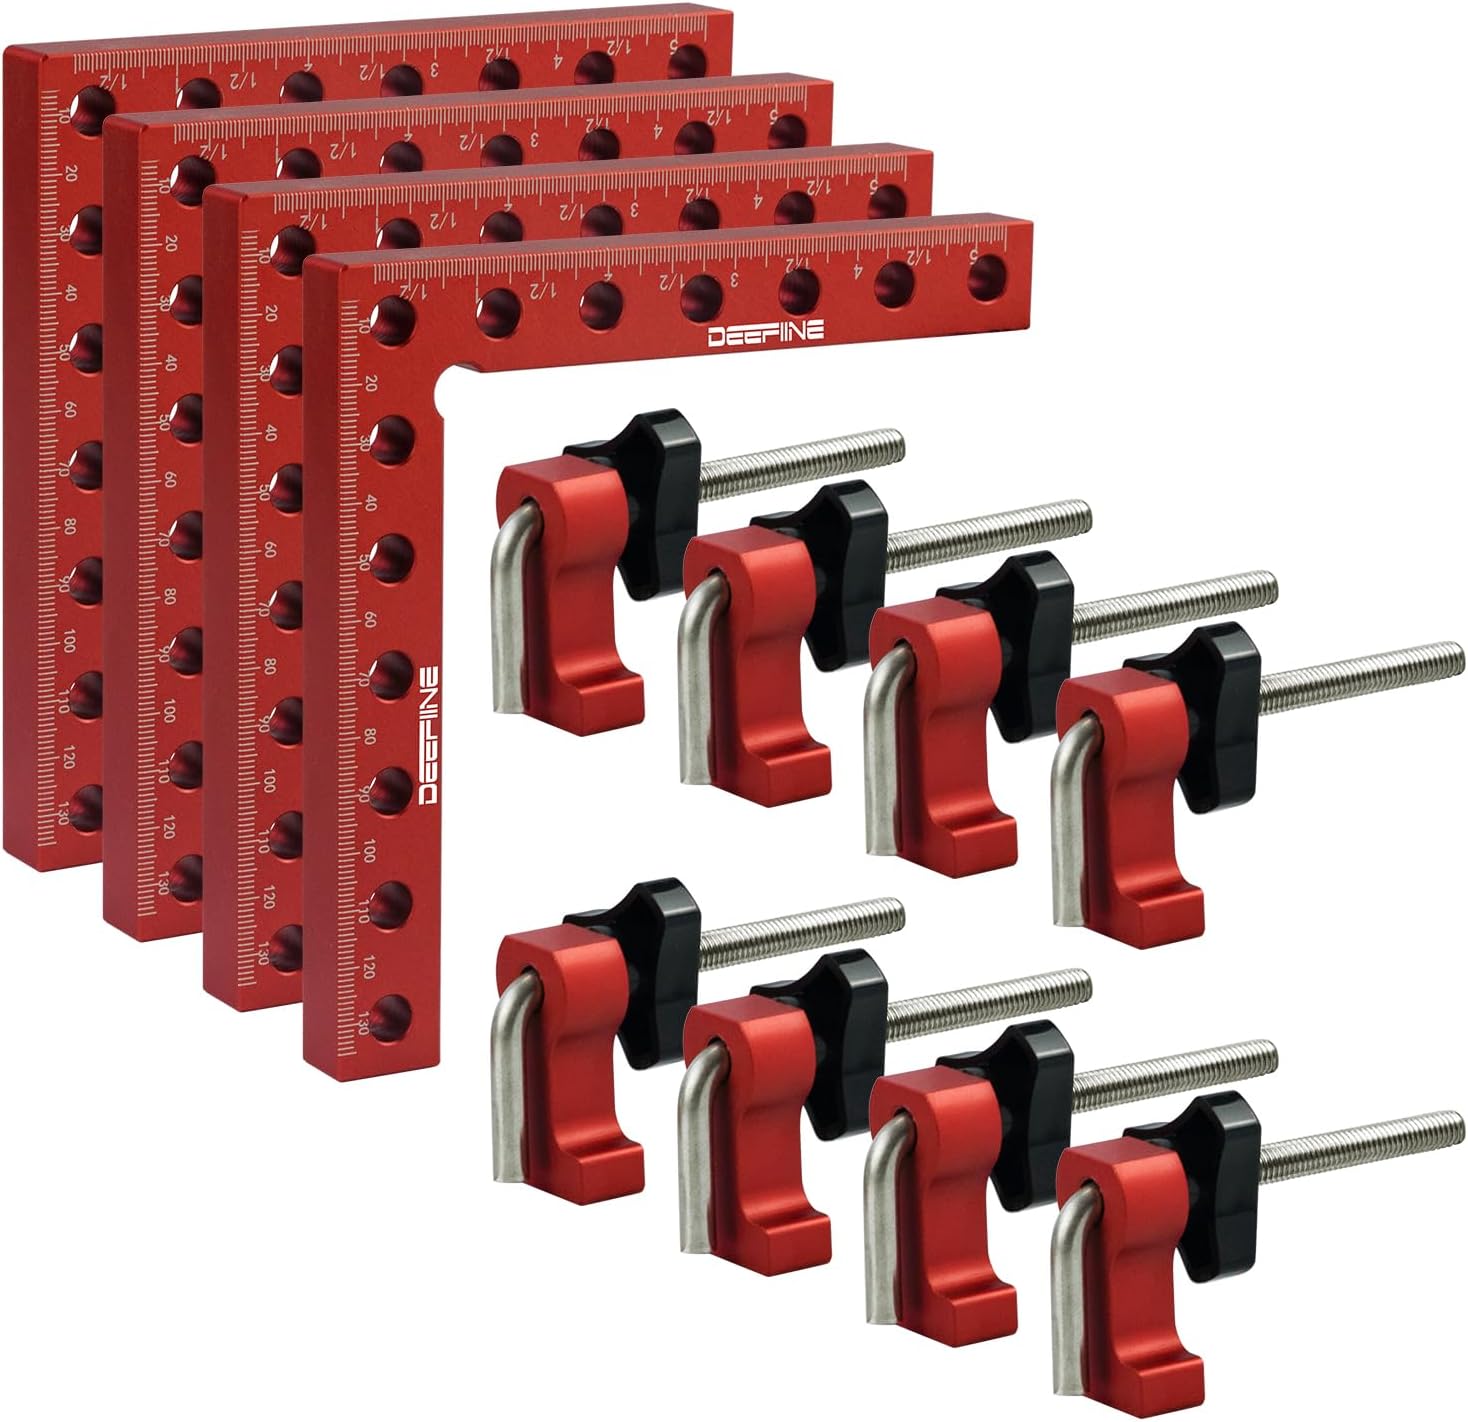 Angle Clamps WholeSale - Price List, Bulk Buy at